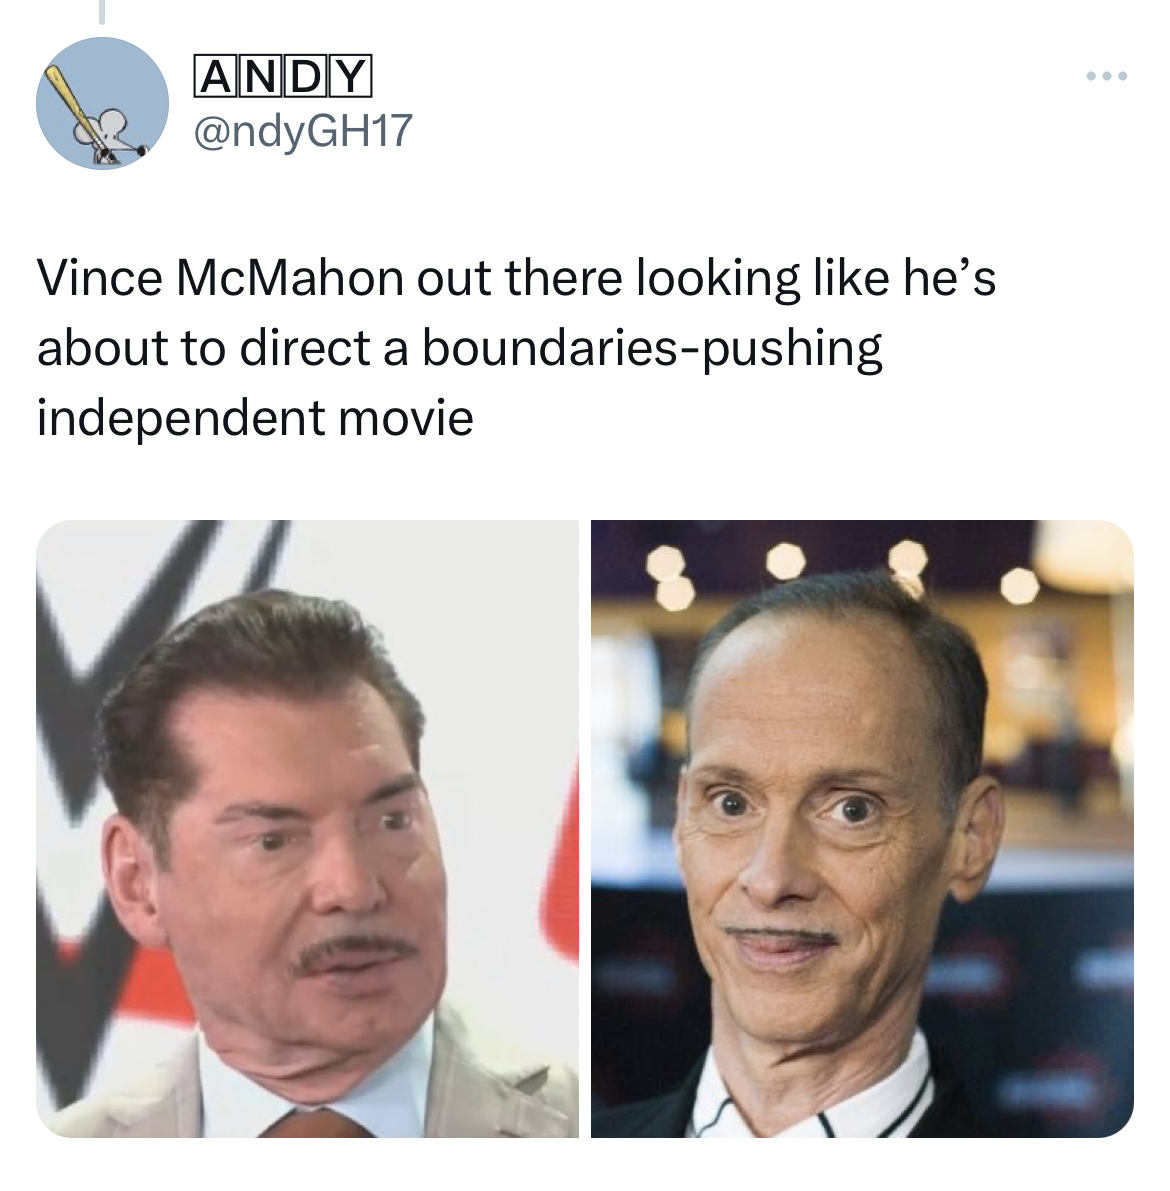 Vince McMahon Mustache memes - human behavior - Andy Vince McMahon out there looking he's about to direct a boundariespushing independent movie www